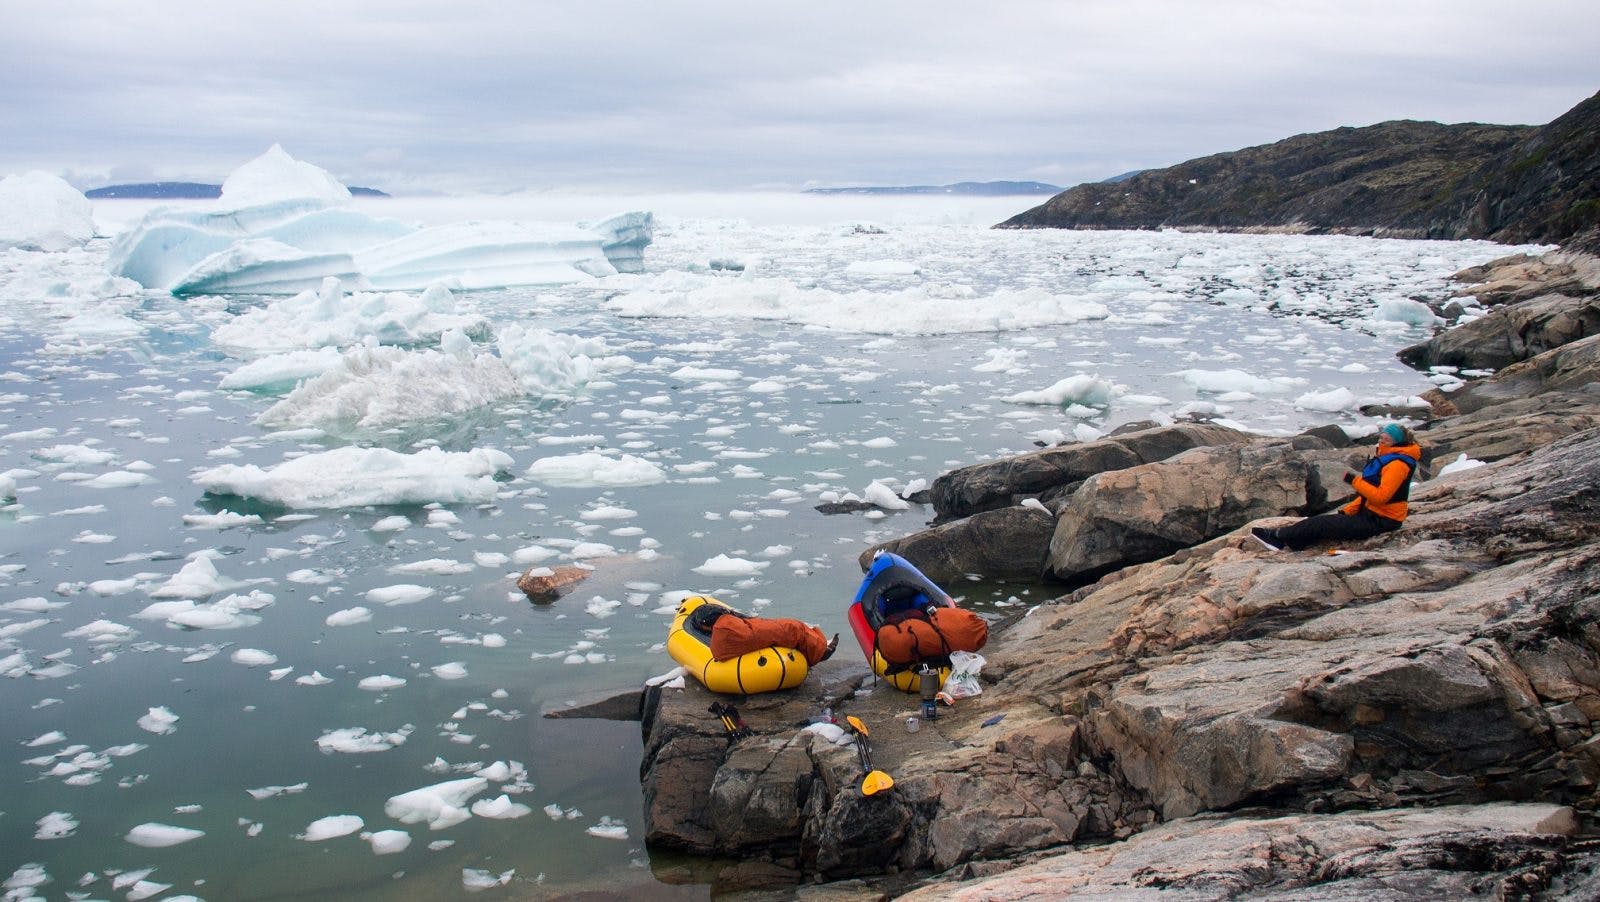 Paddling through a labyrinth of ice near Ilulissat Ice Fjord, West Greenland. We hugged the coastline for 7km while bumping from one ice chunk to the next, to avoid a difficult hiking section on steep and wet rock slabs.